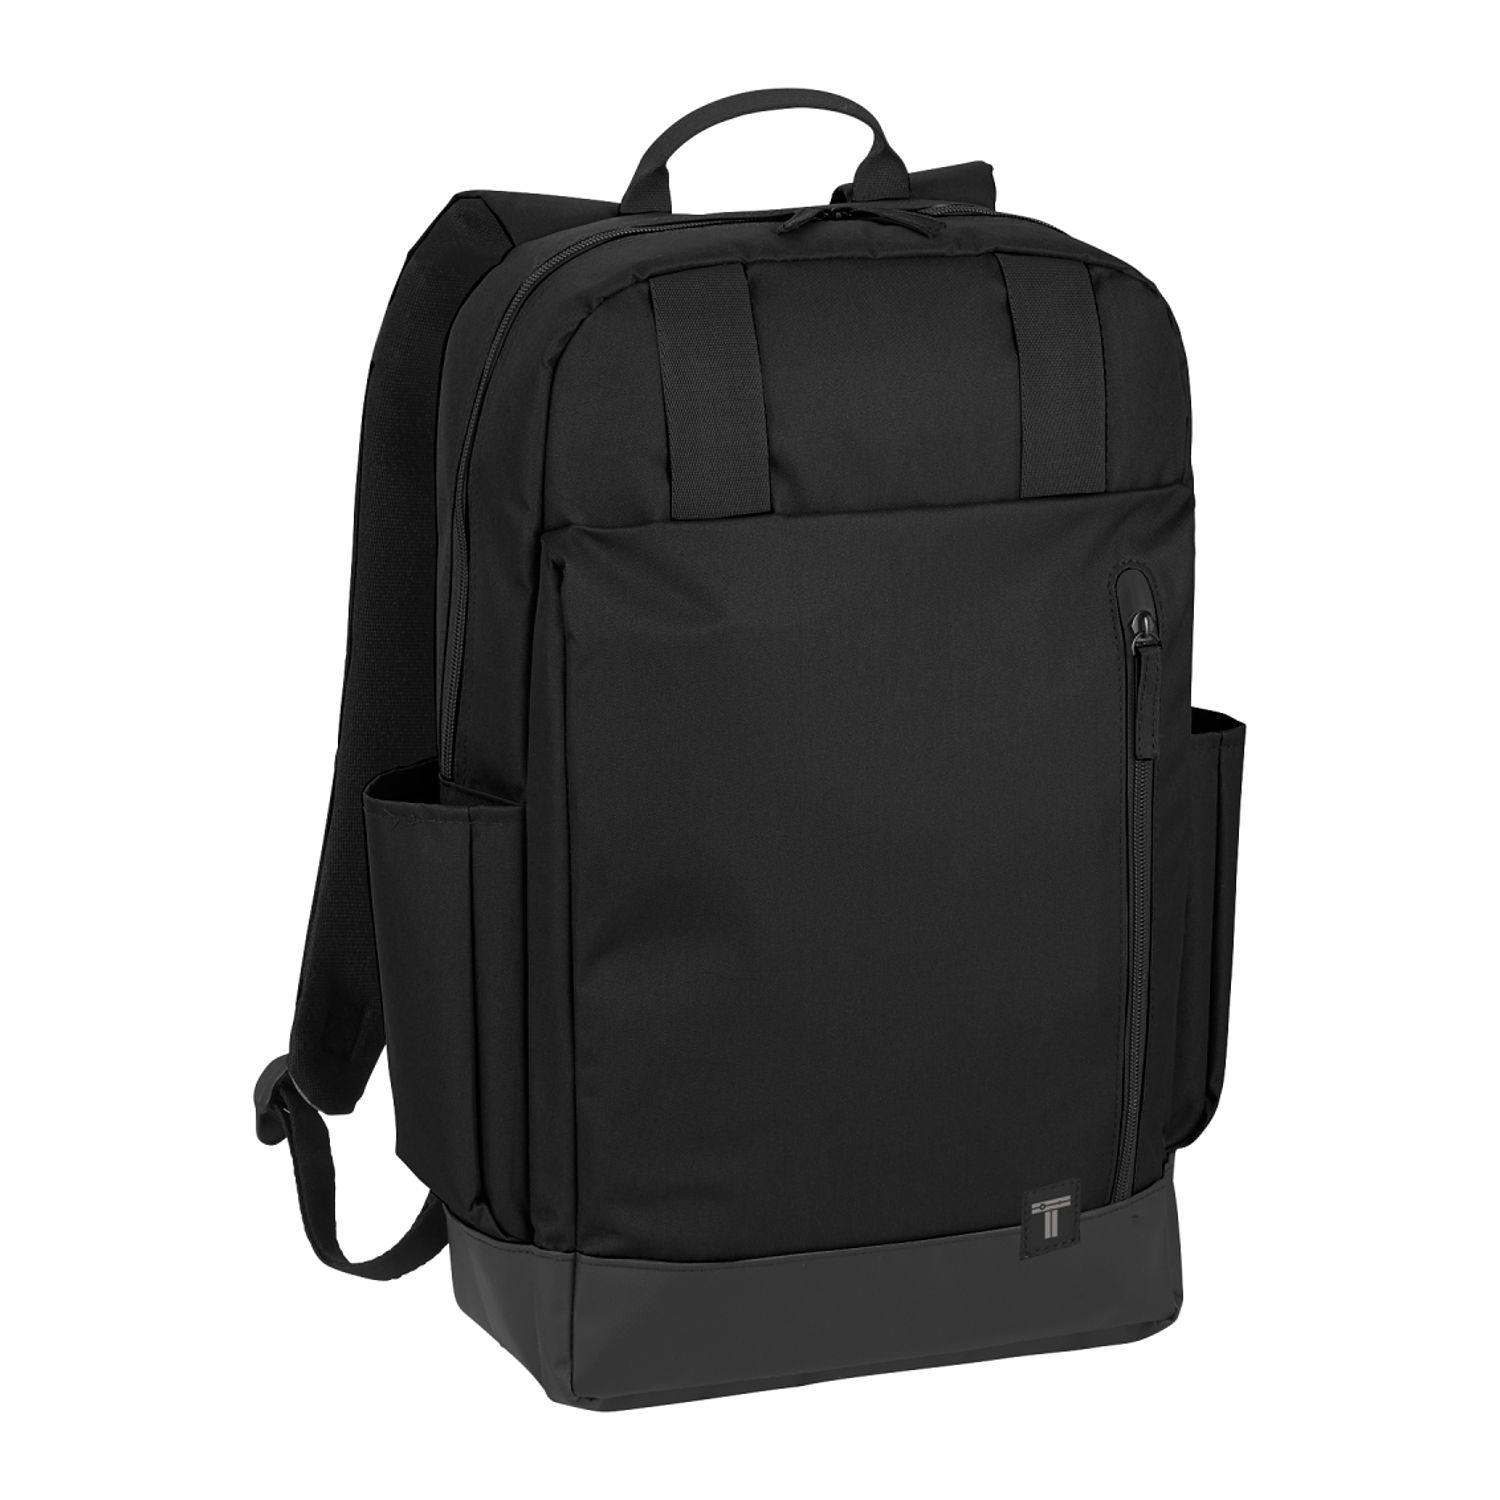 Tranzip 15" Computer Day Pack - additional Image 1